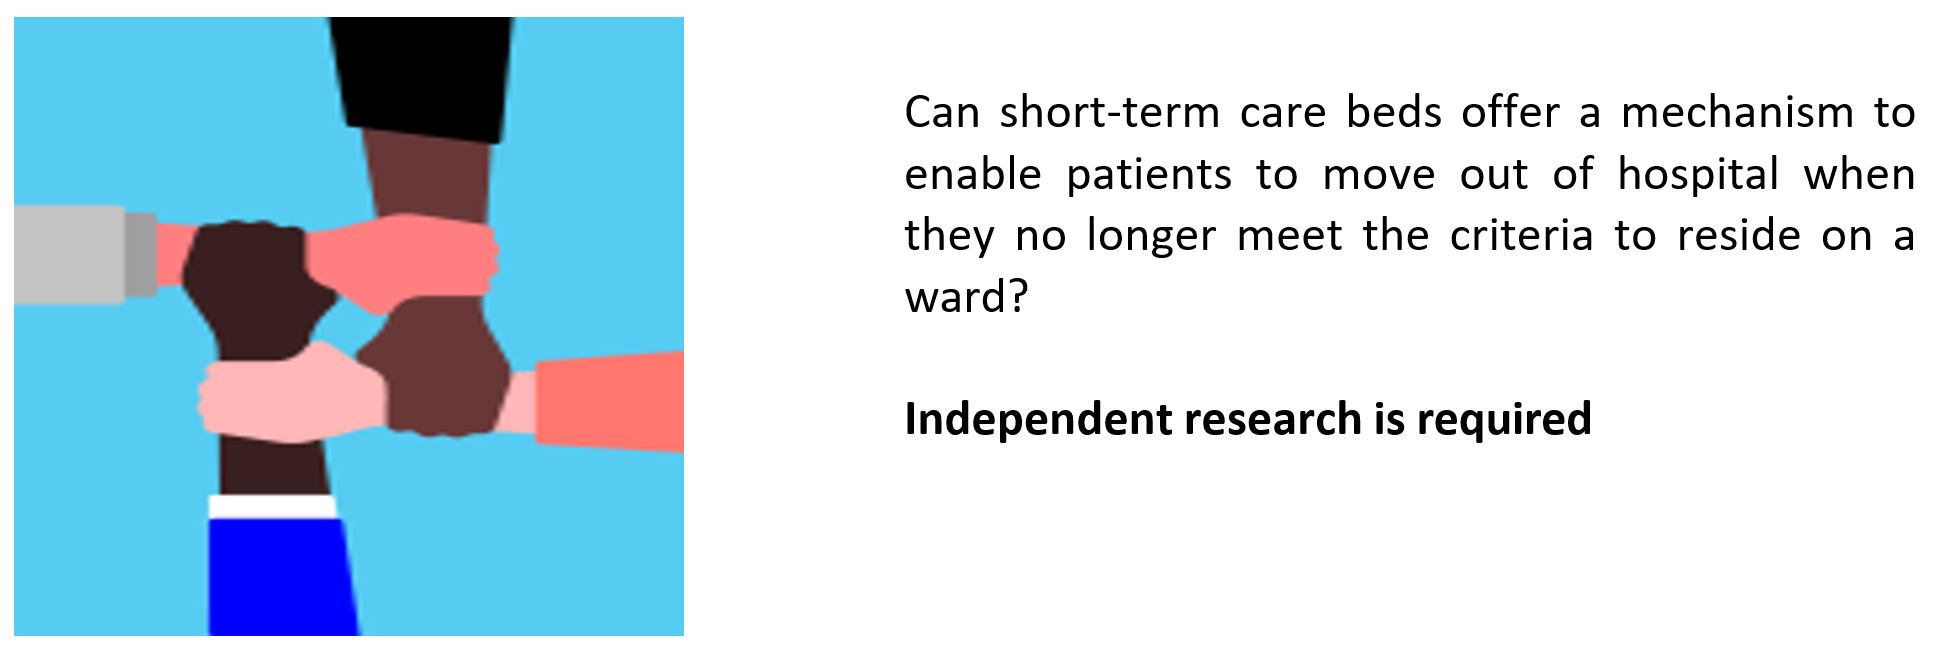 Image of four hands joined together - text reads: Can short-term care beds offer a mechanism to enable patients to move out of hospital when they no longer meet the criteria to reside on a ward? Independent research is required 